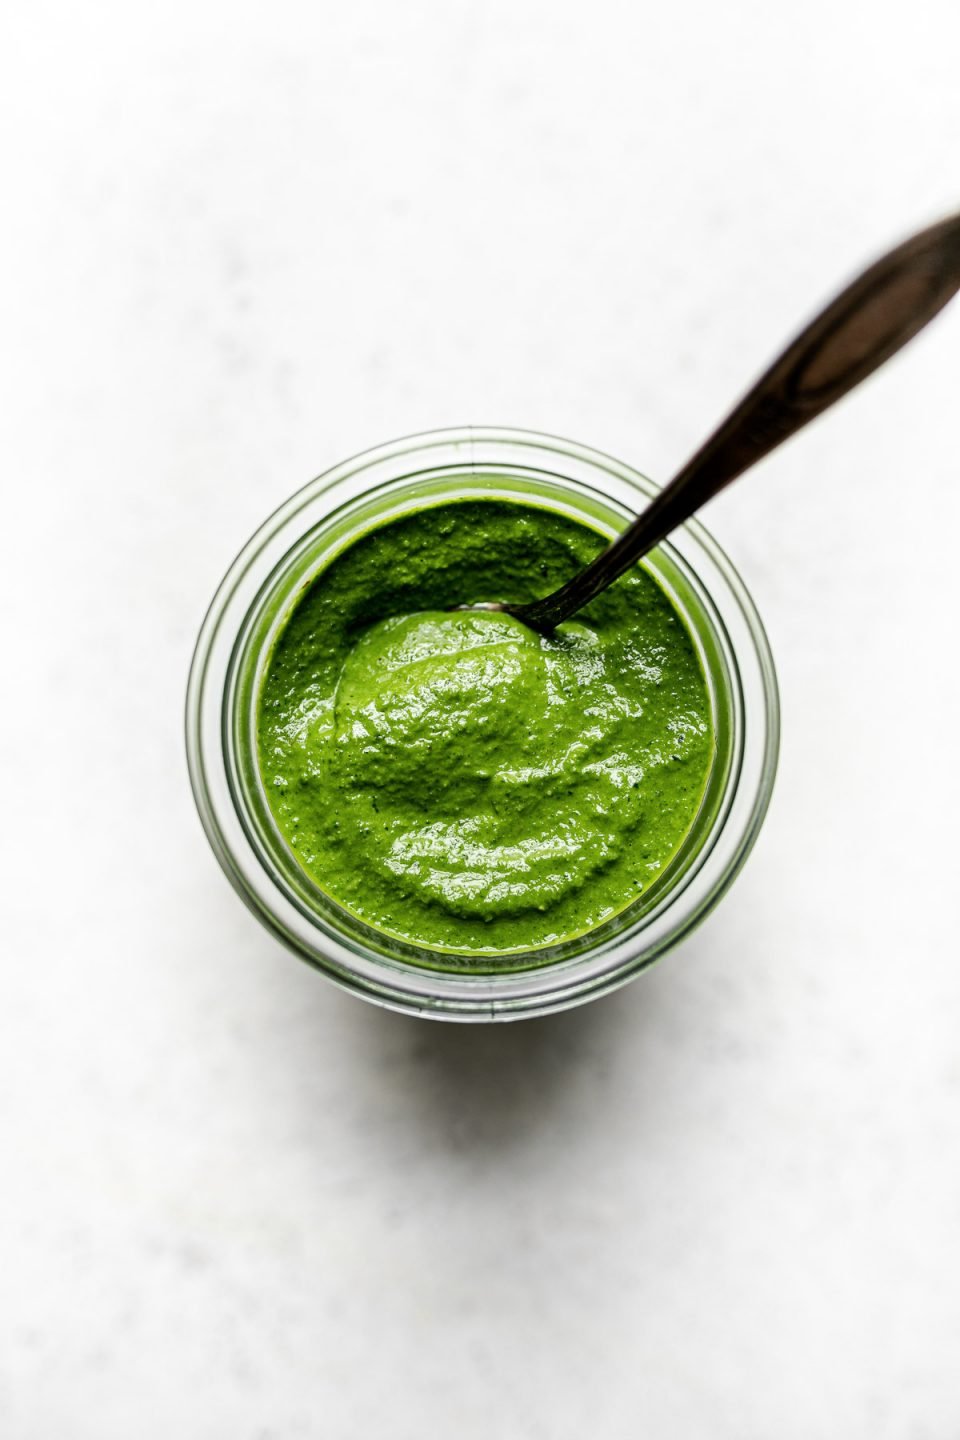 Kale basil pesto in a jar, with a spoon in it. The jar sits atop a white surface.